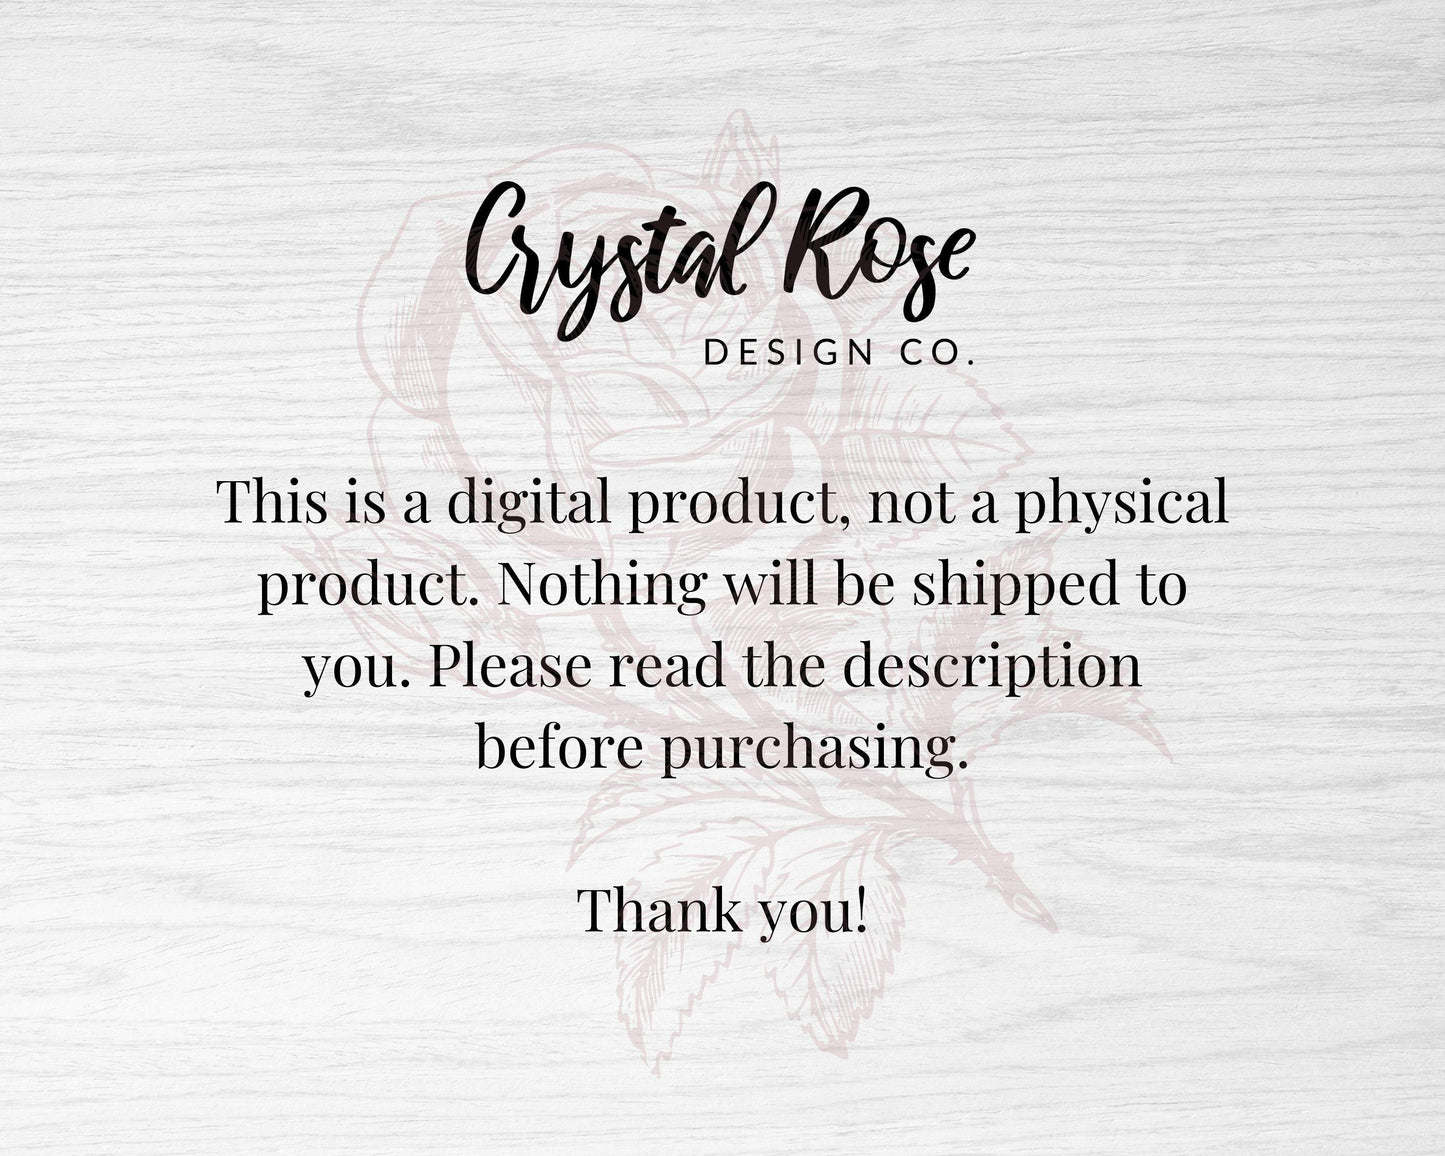 Retro Be The Good SVG, Inspirational SVG, Digital Download, Cricut, Silhouette, Glowforge (includes svg/png/dxf/eps) - Crystal Rose Design Co.